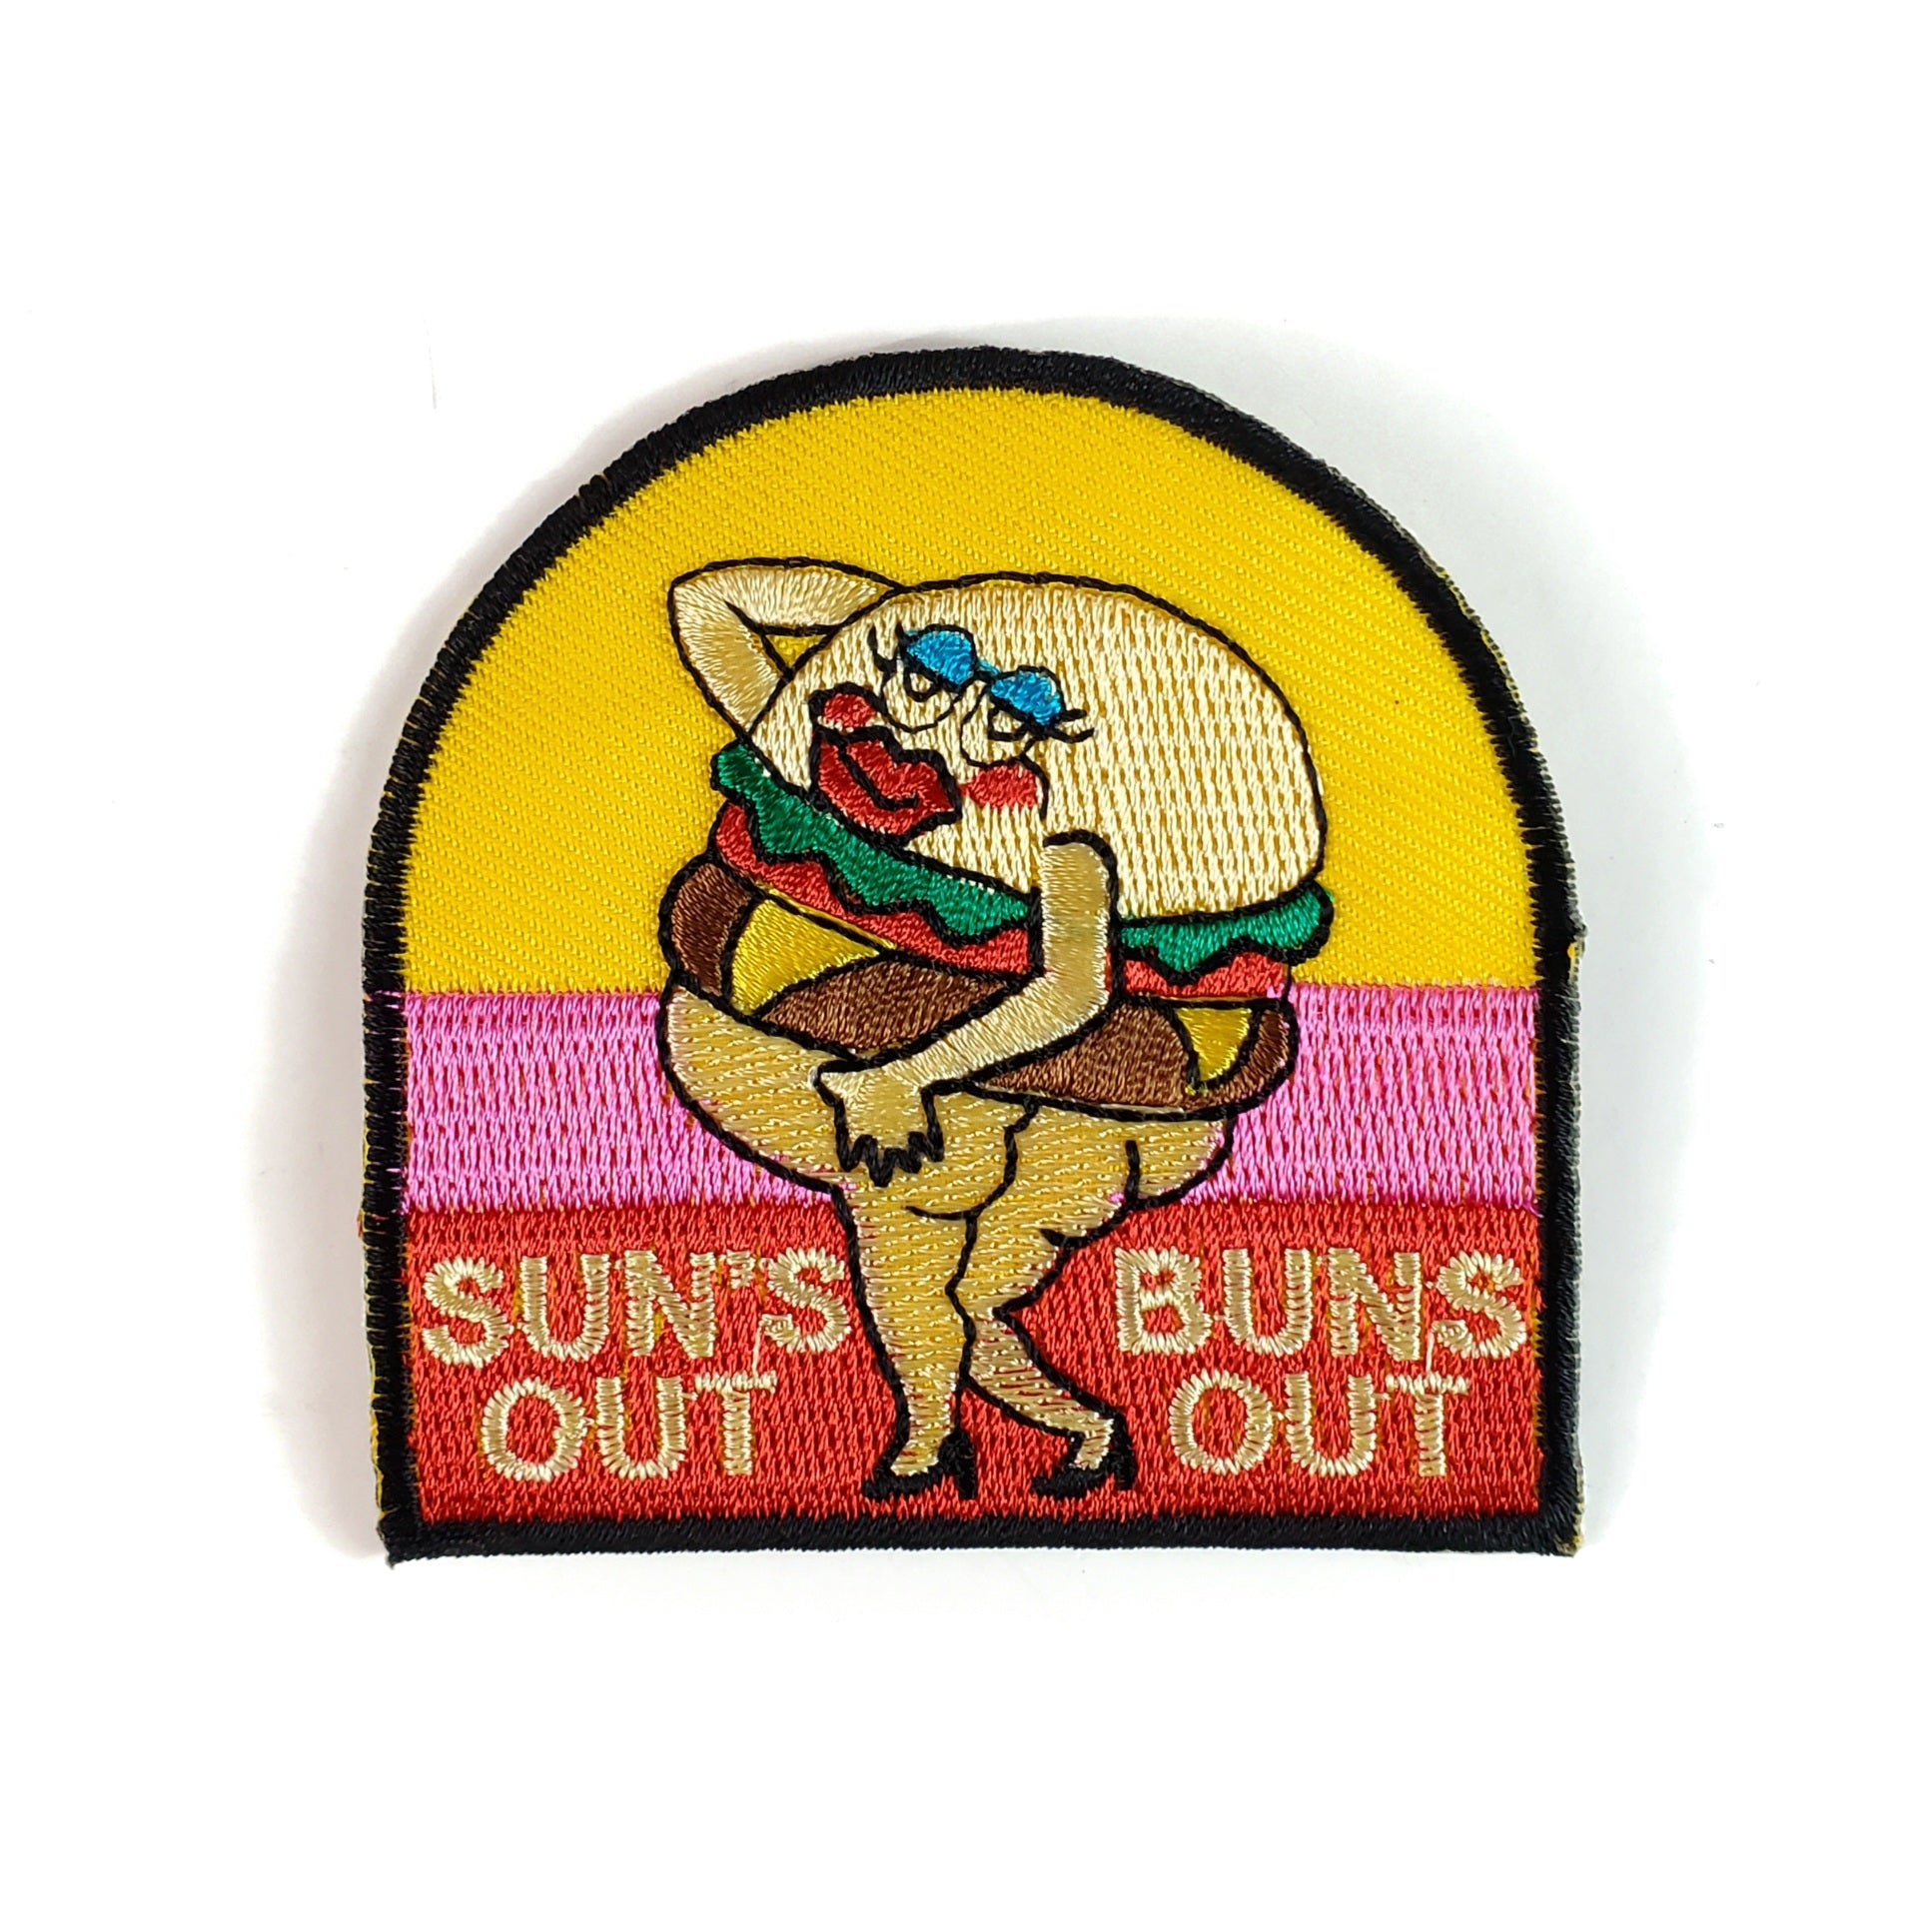 A semicircular embroidered patch of a hamburger with a human face, butt, and legs in high heels posing behind a yellow, pink and red background. The words “SUN’S OUT BUNS OUT” are written at the bottom of the patch